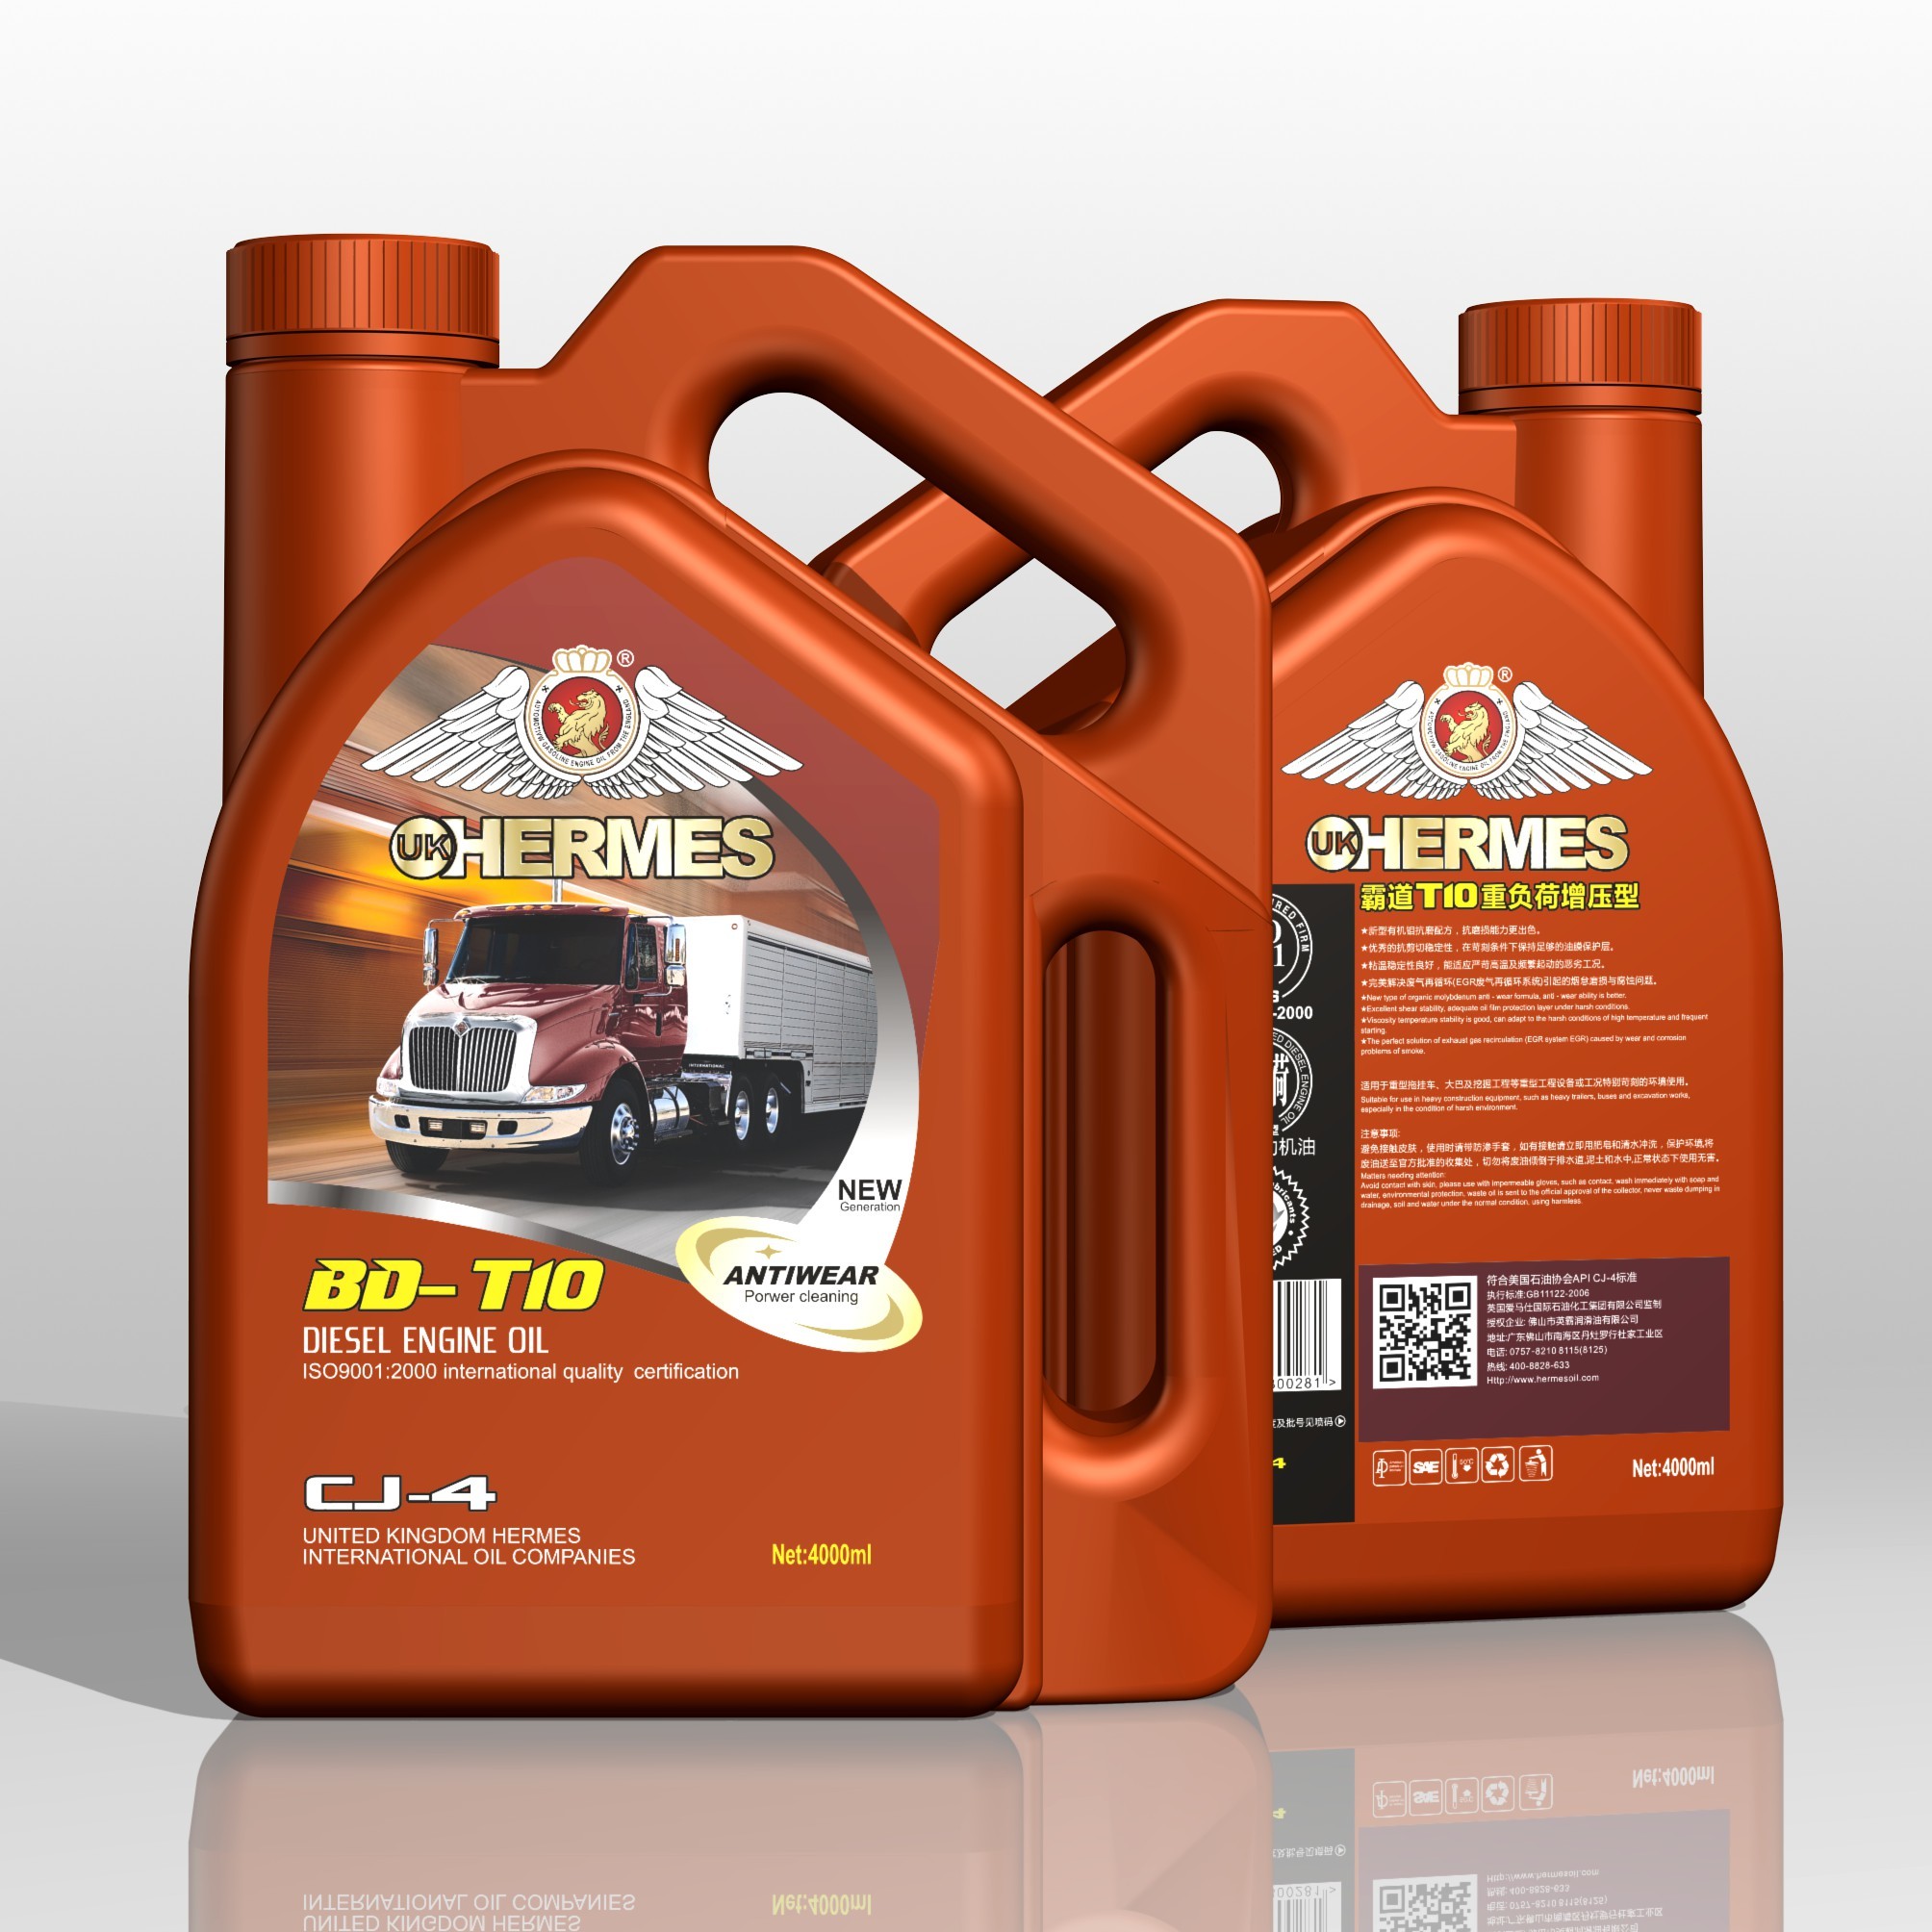 BD-T10 fully synthetic supercharged diesel engine oil (CJ-4)